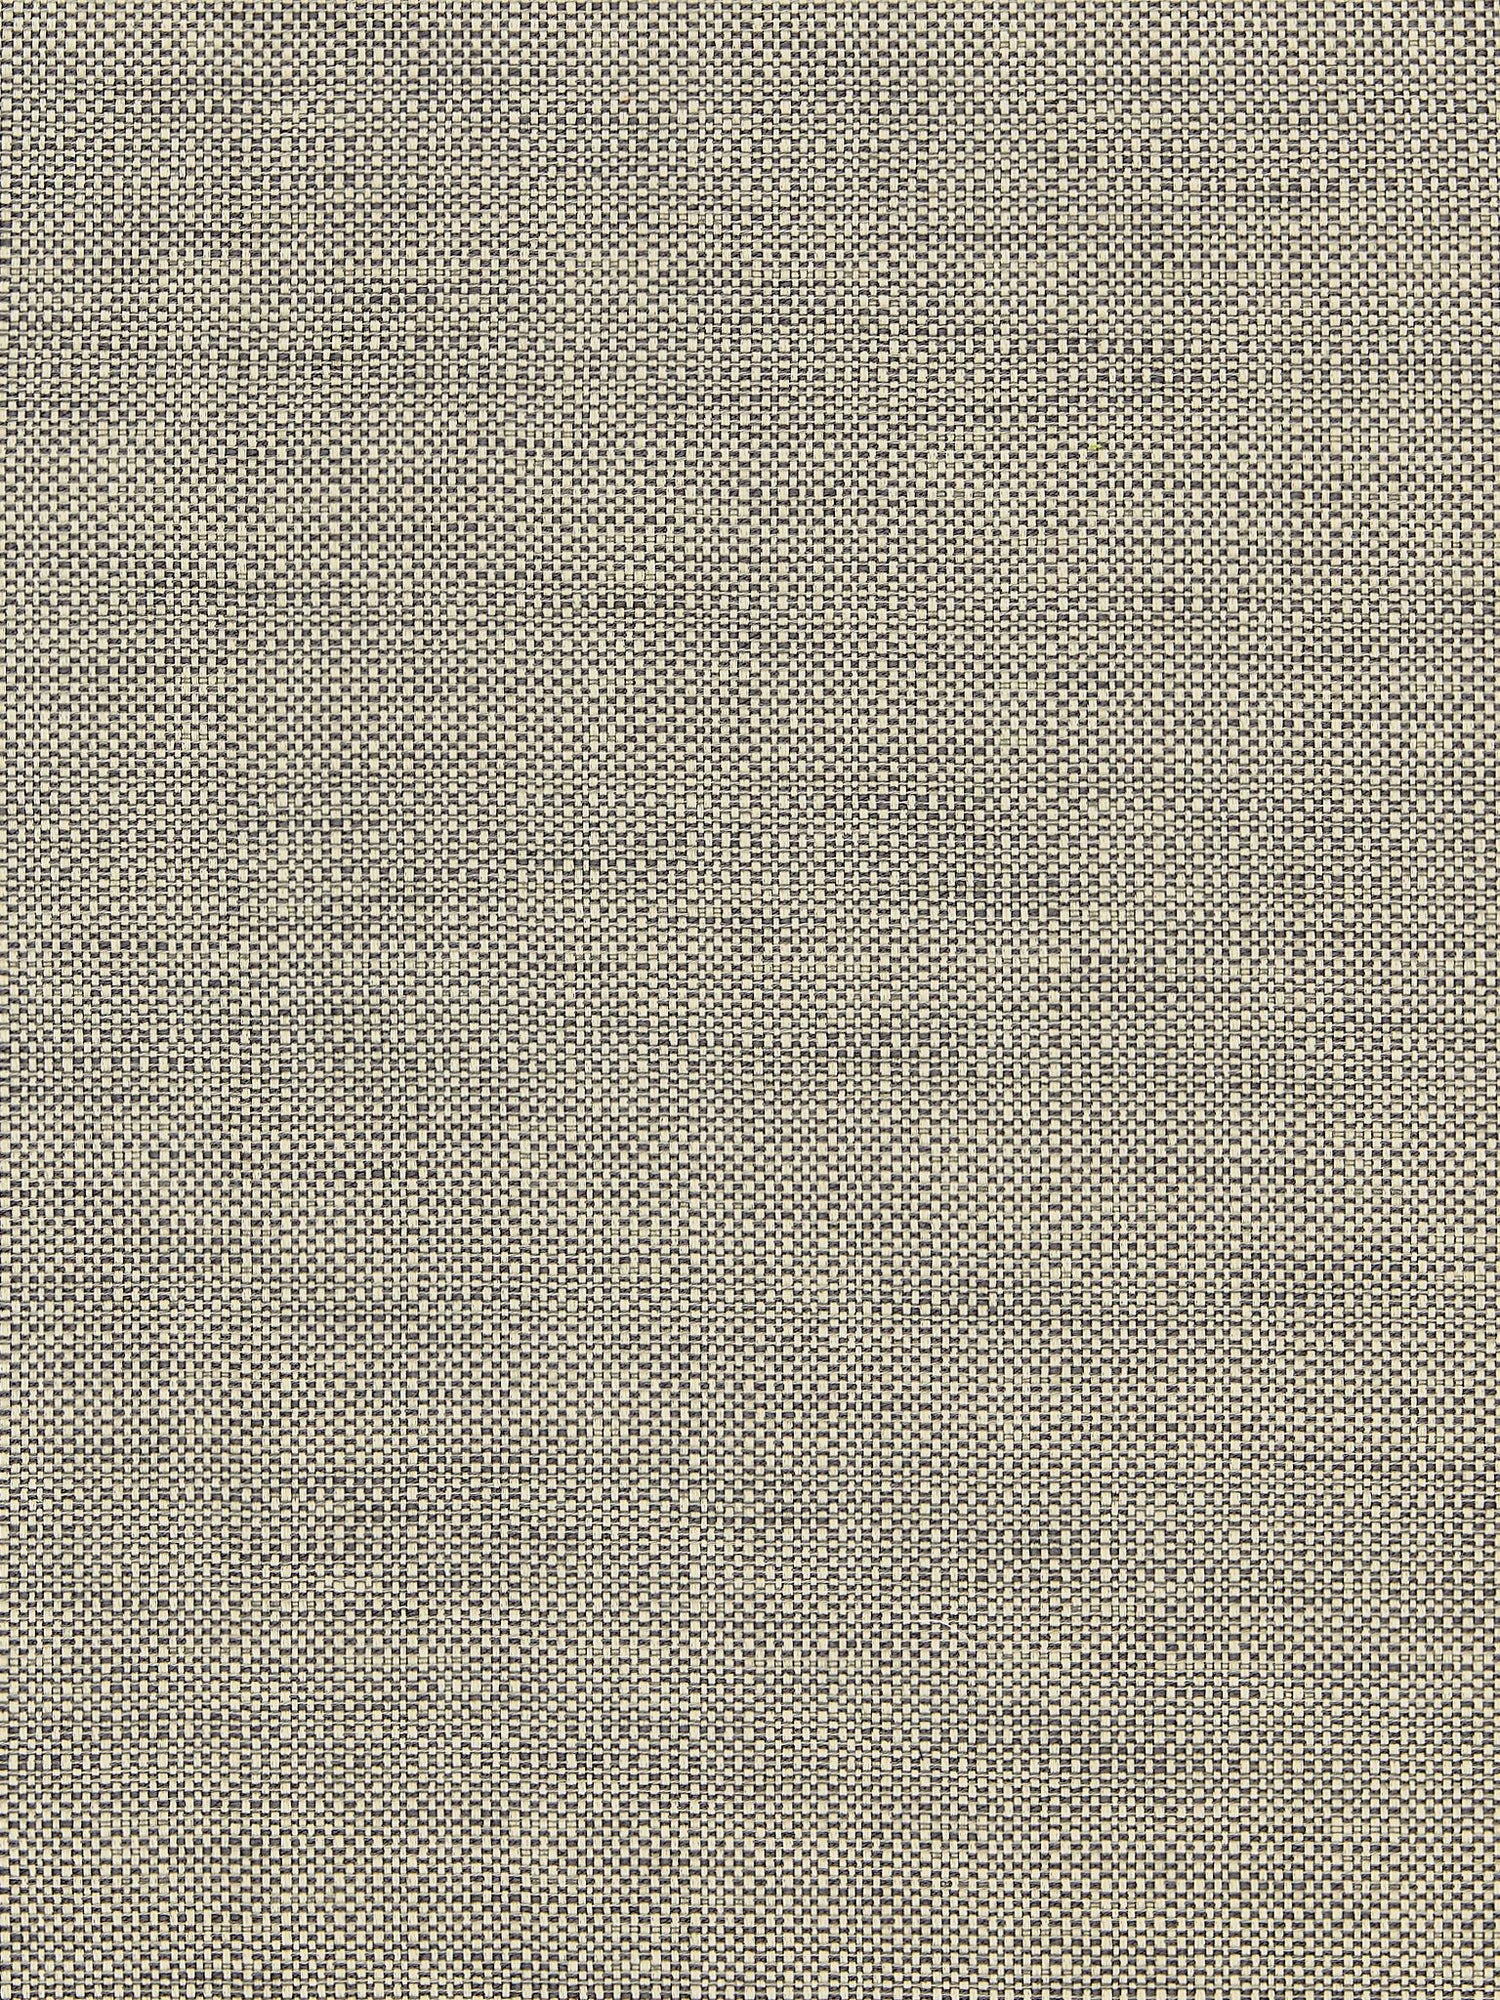 Chester Weave fabric in granite color - pattern number BK 0006K65118 - by Scalamandre in the Old World Weavers collection